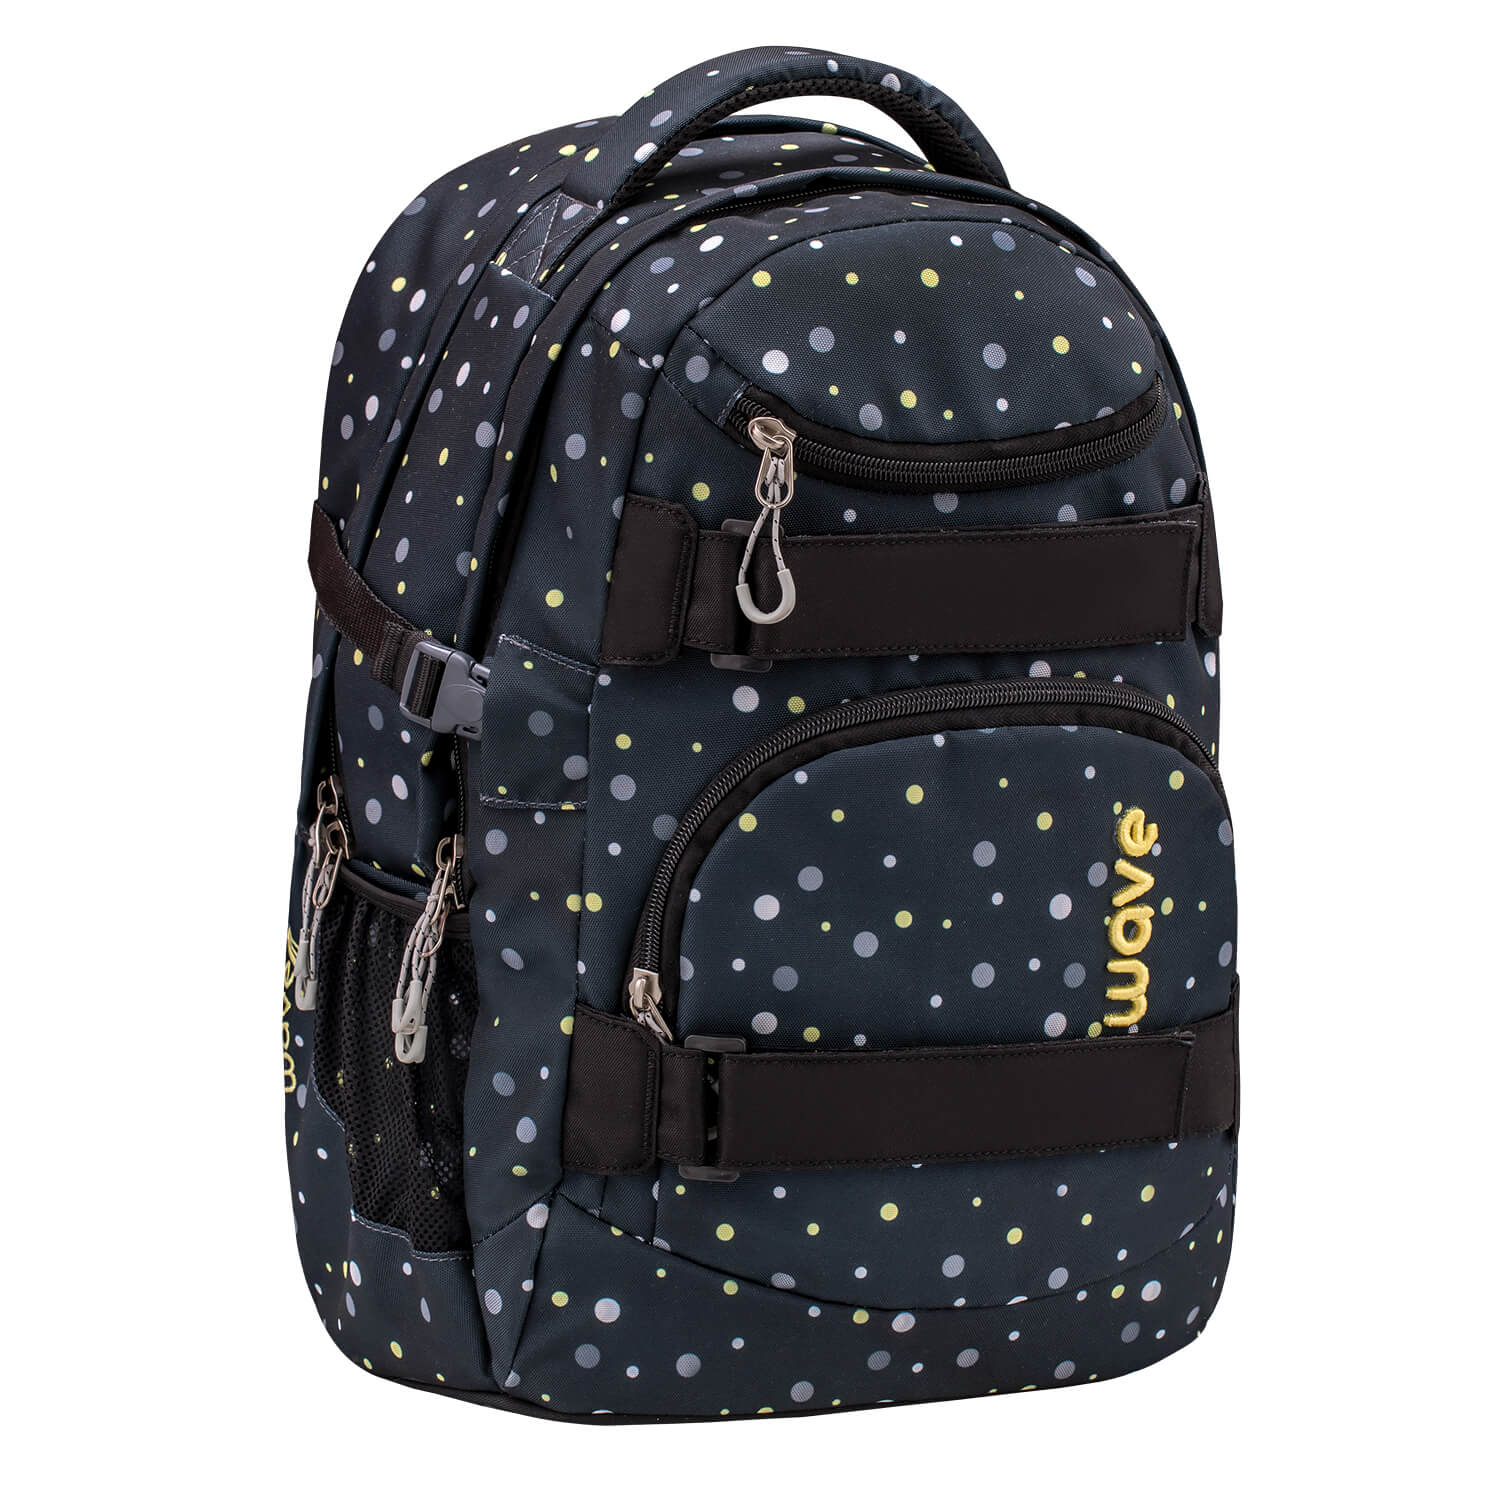 Wave Infinity Black And Yellow Dots school backpack Set 2 Pcs